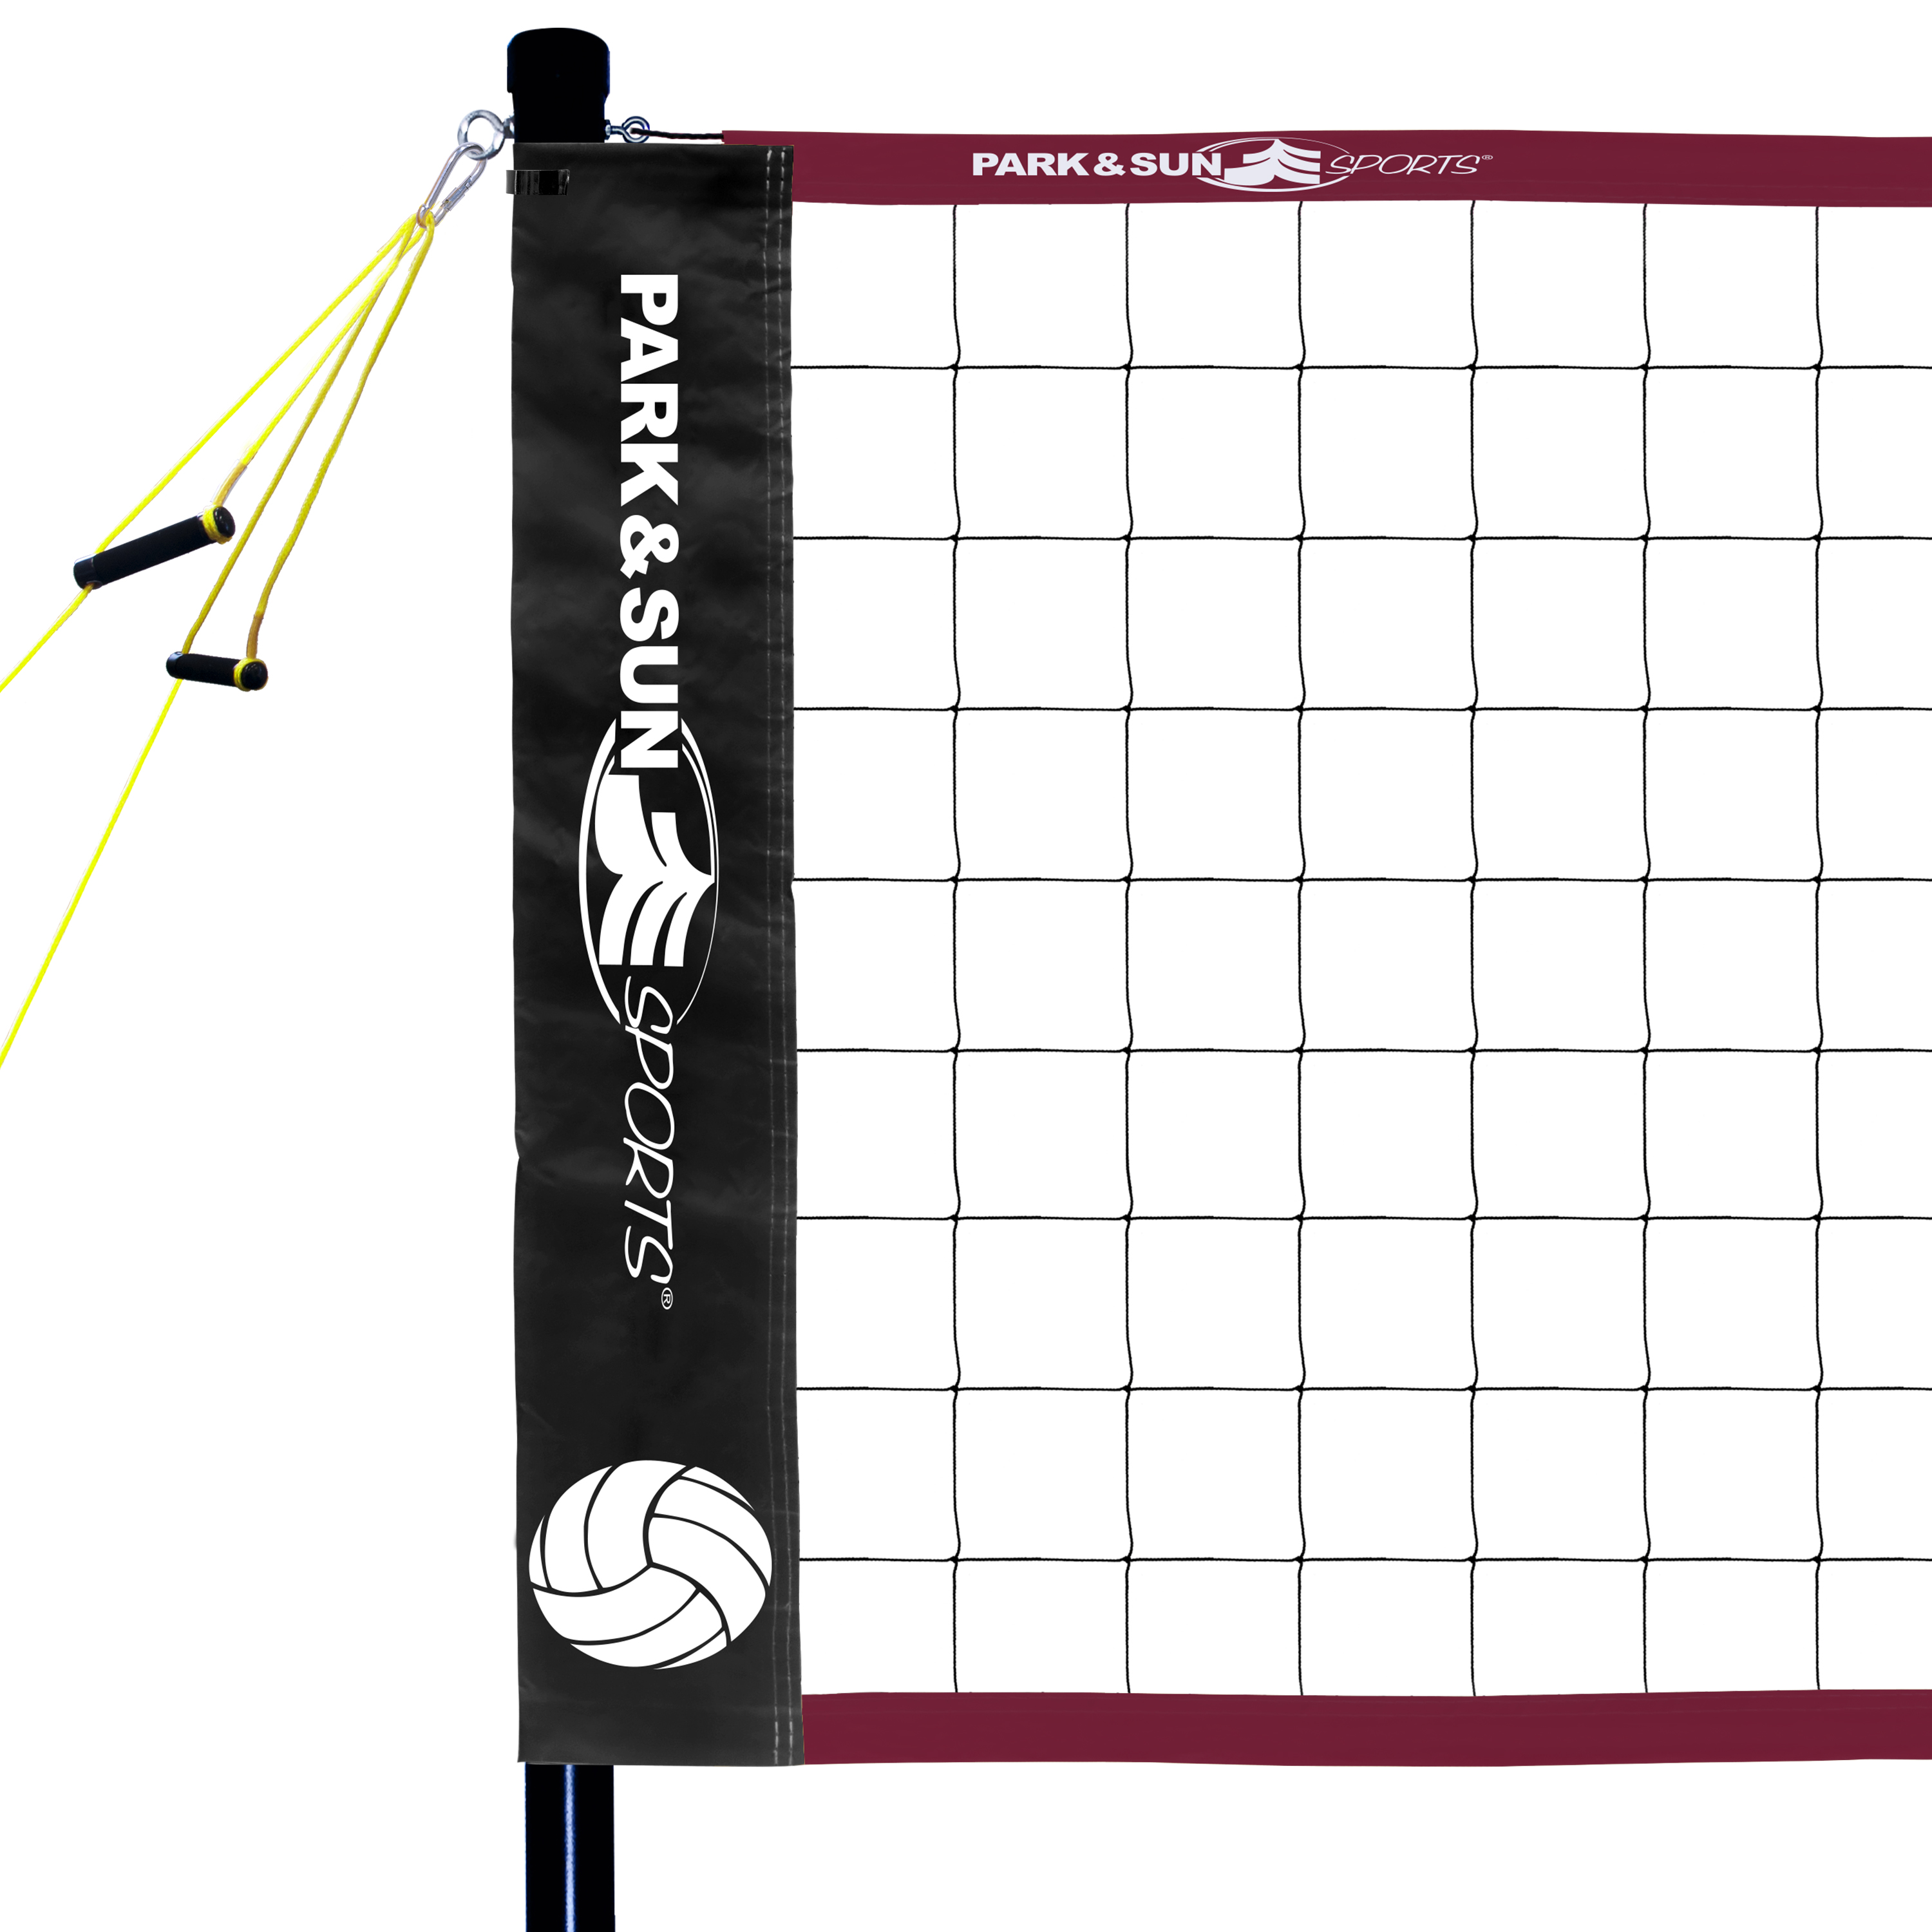 New Burgnady grass and beach portable volleyball set